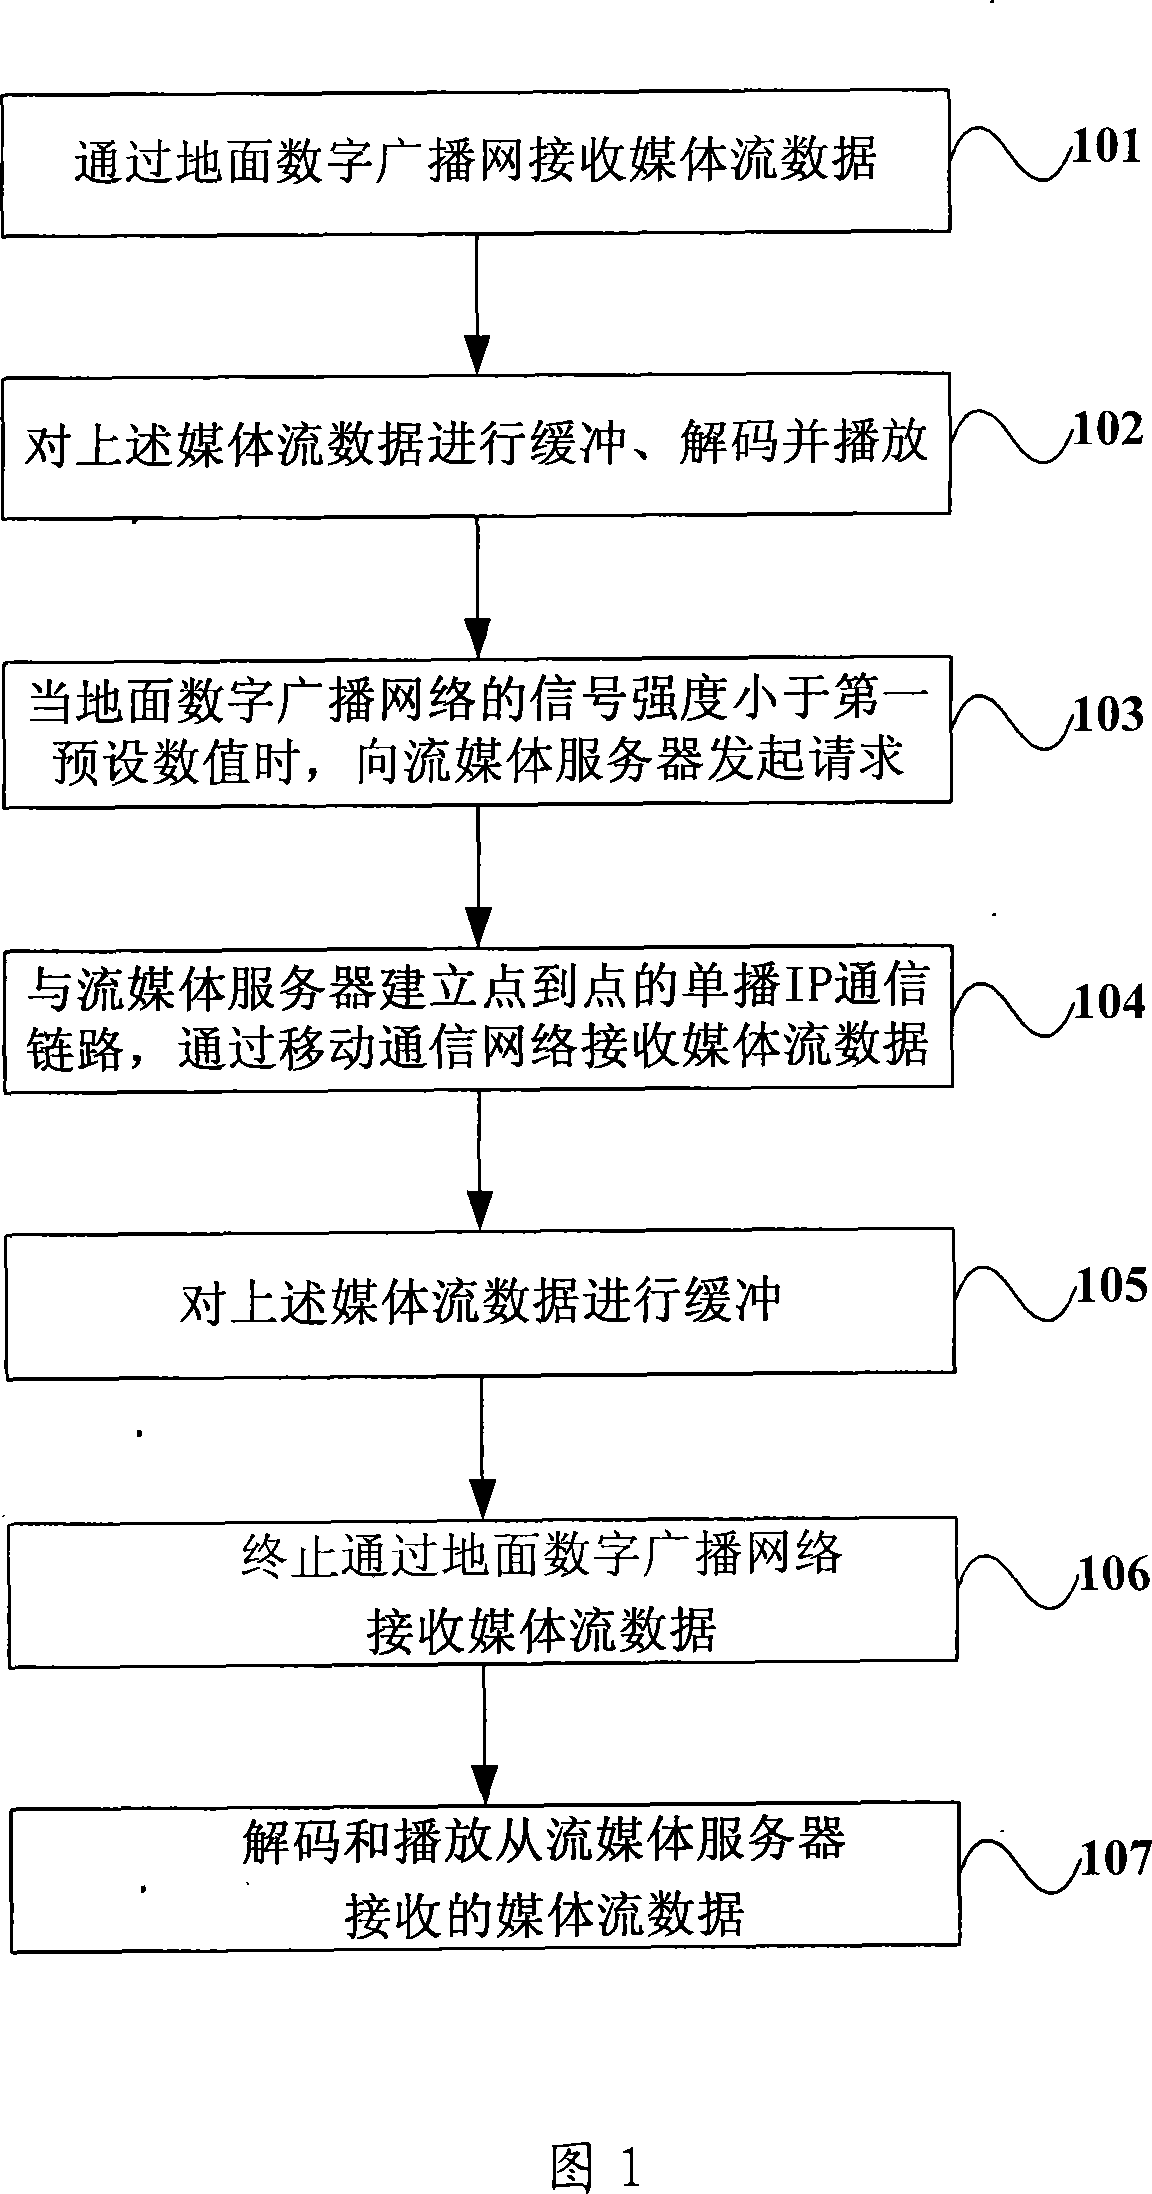 System, apparatus and method for switching network of mobile multimedia business